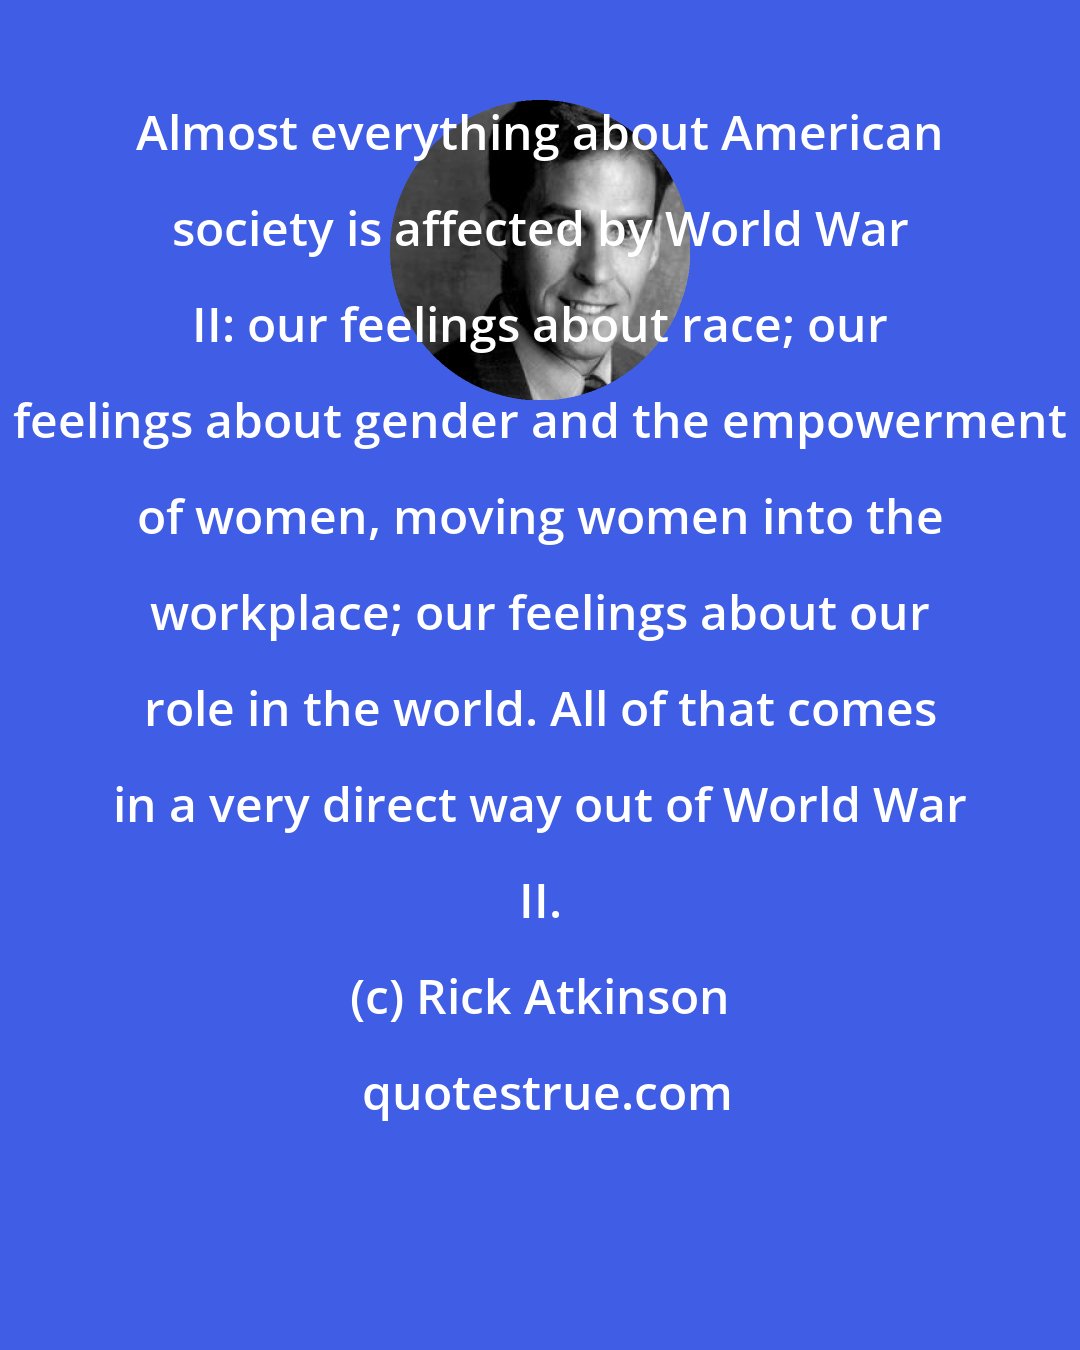 Rick Atkinson: Almost everything about American society is affected by World War II: our feelings about race; our feelings about gender and the empowerment of women, moving women into the workplace; our feelings about our role in the world. All of that comes in a very direct way out of World War II.